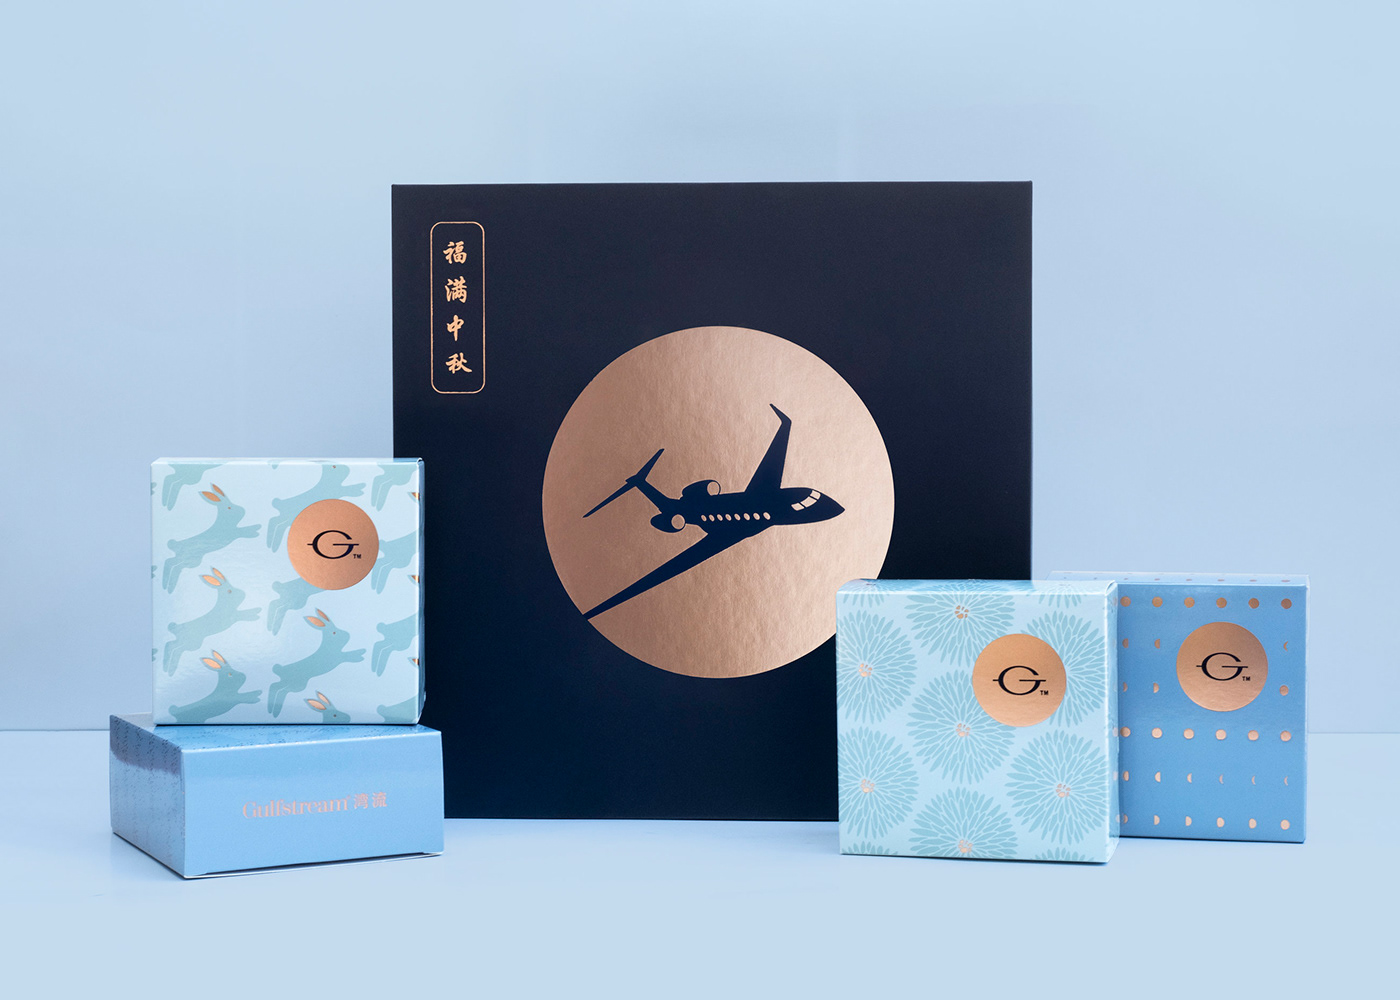 mooncake Packaging Mid-Autumn Festival gulfstream aerospace moon cake mid-autumn china chinese Aircraft airplane